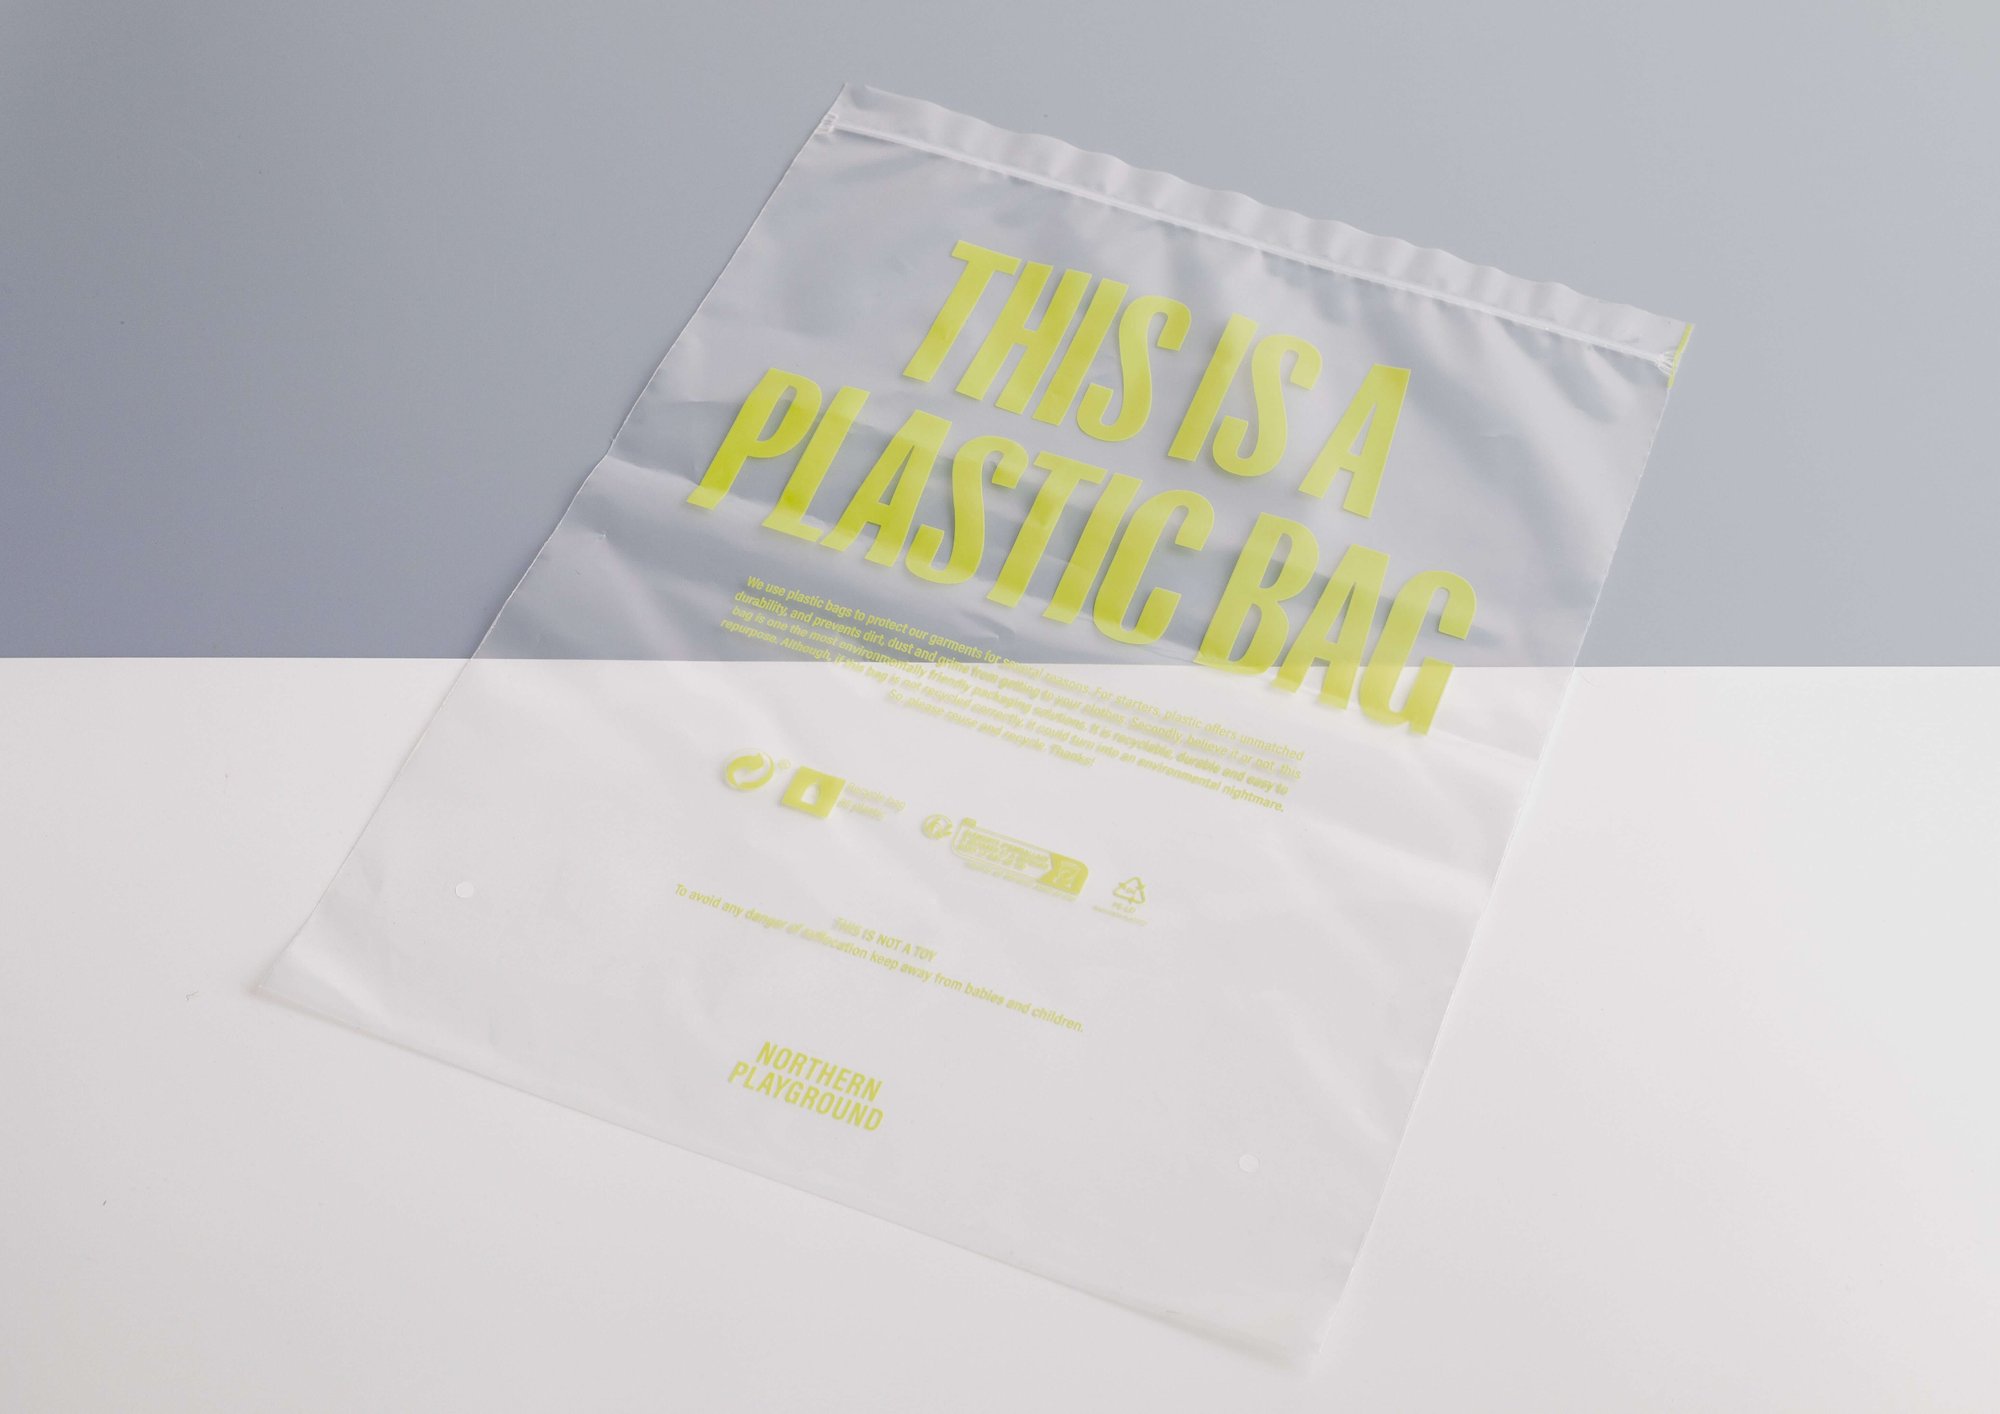 Polybag options - this is a plastic bag